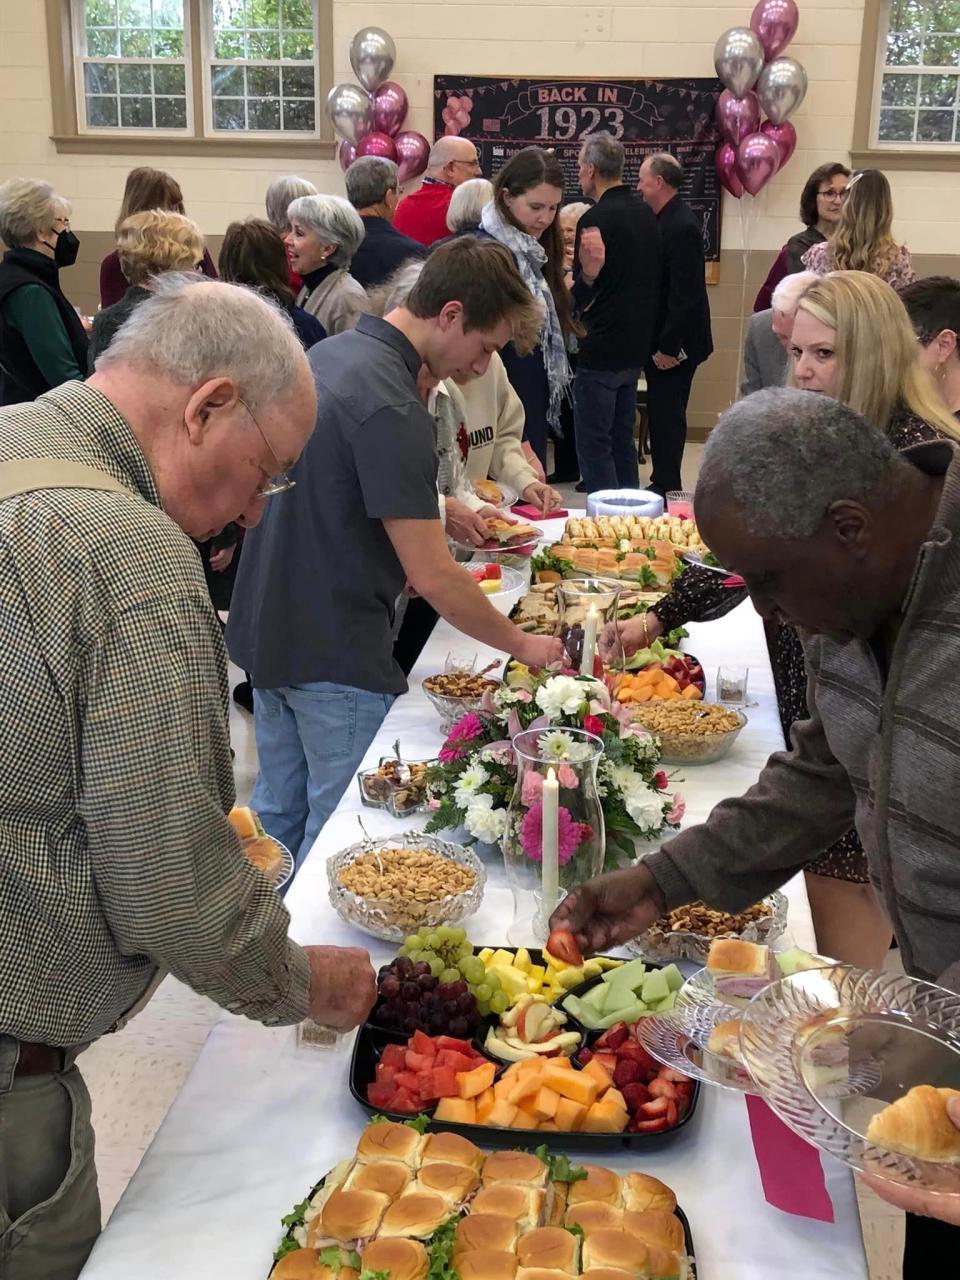 Guests enjoy the luncheon at Arlene Layne Stanton's 100th birthday celebration in Chester on December 28, 2023.